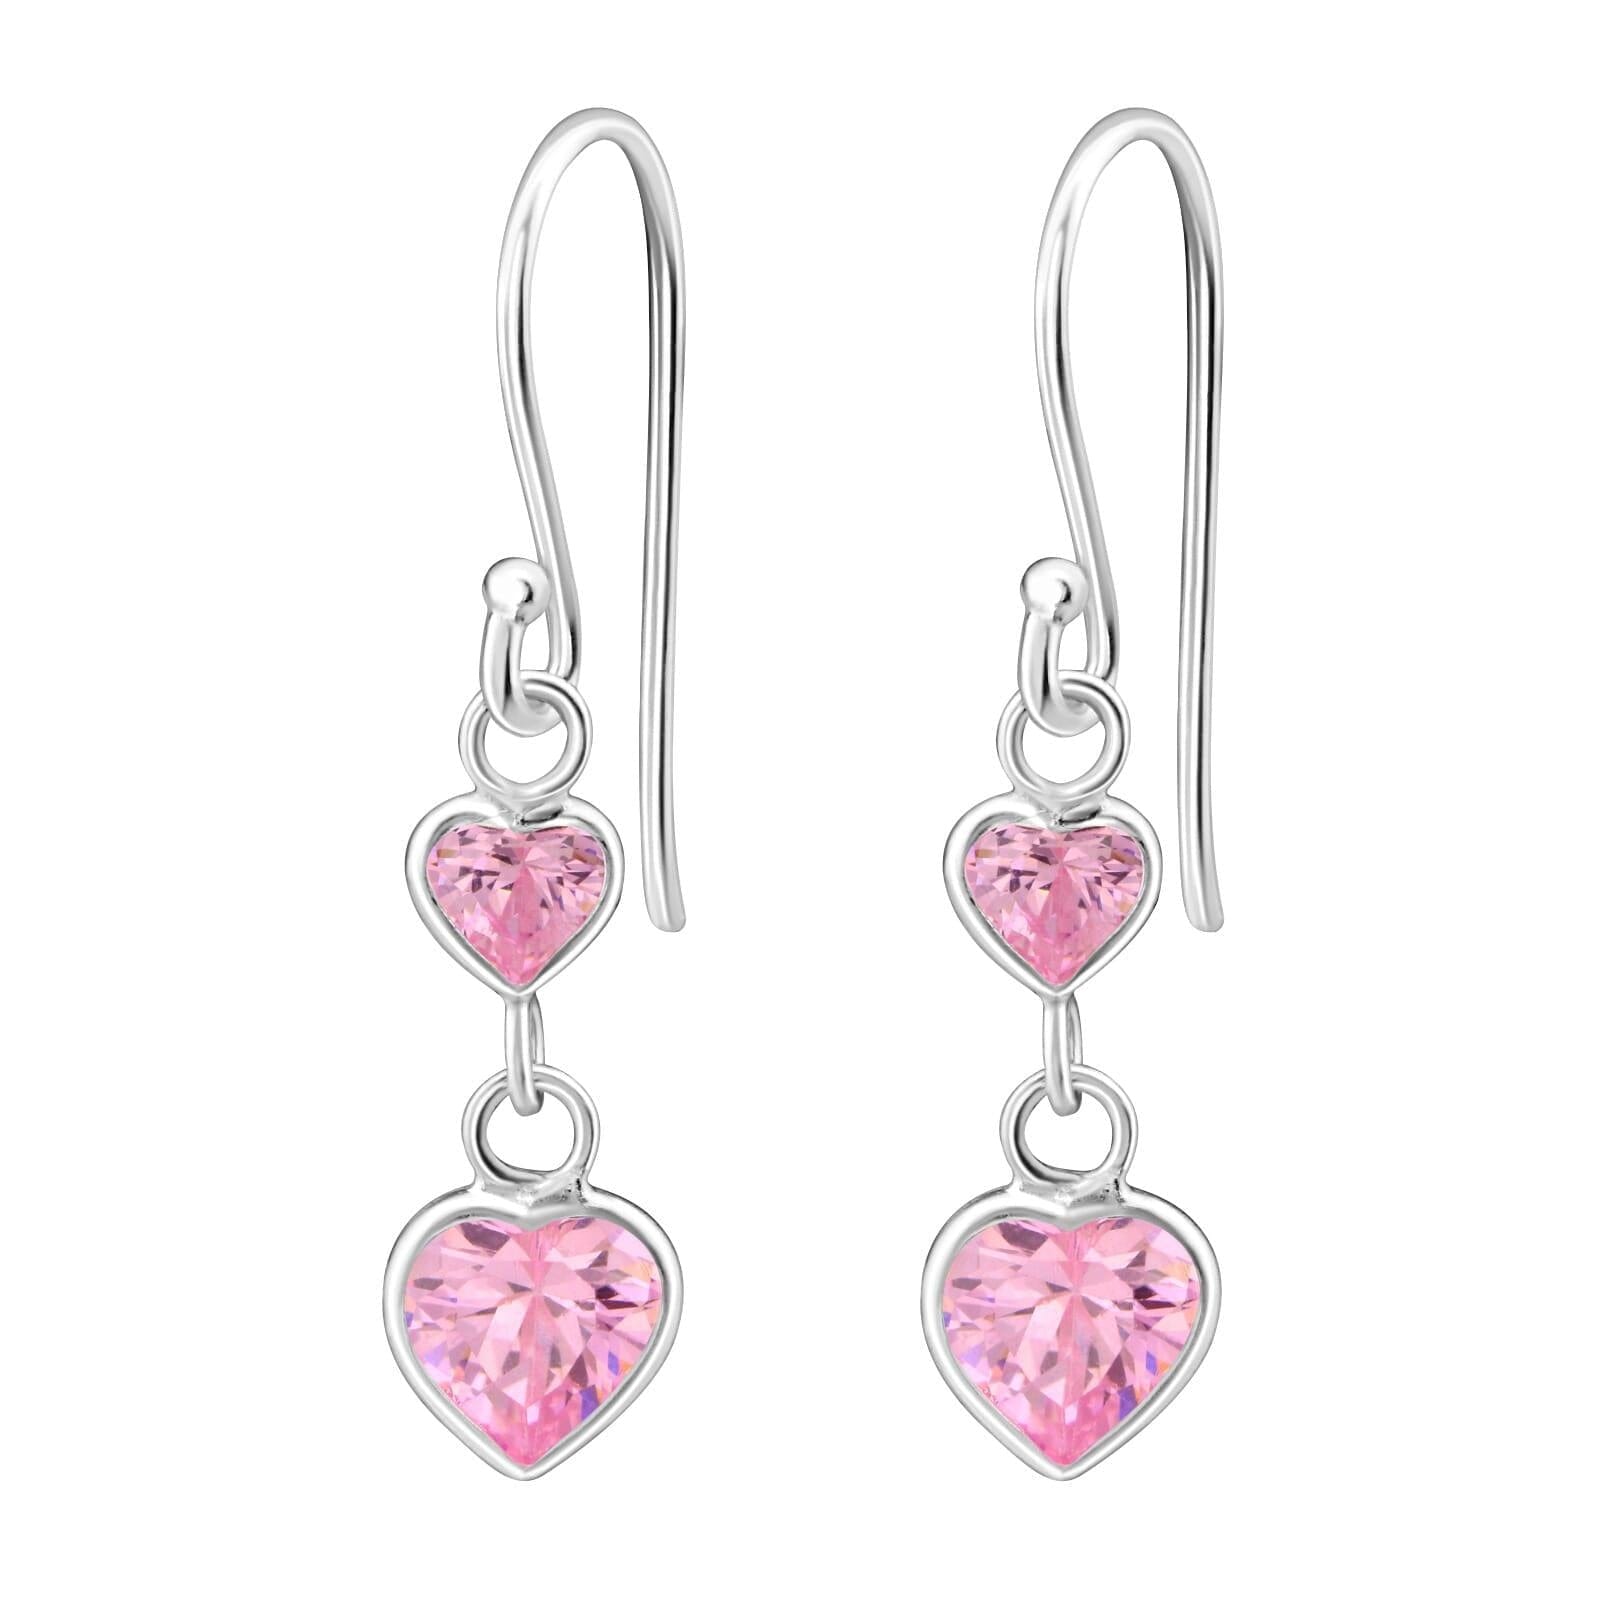 Asfour 925 Sterling Silver Earring with Round Zicron Stone, Rose